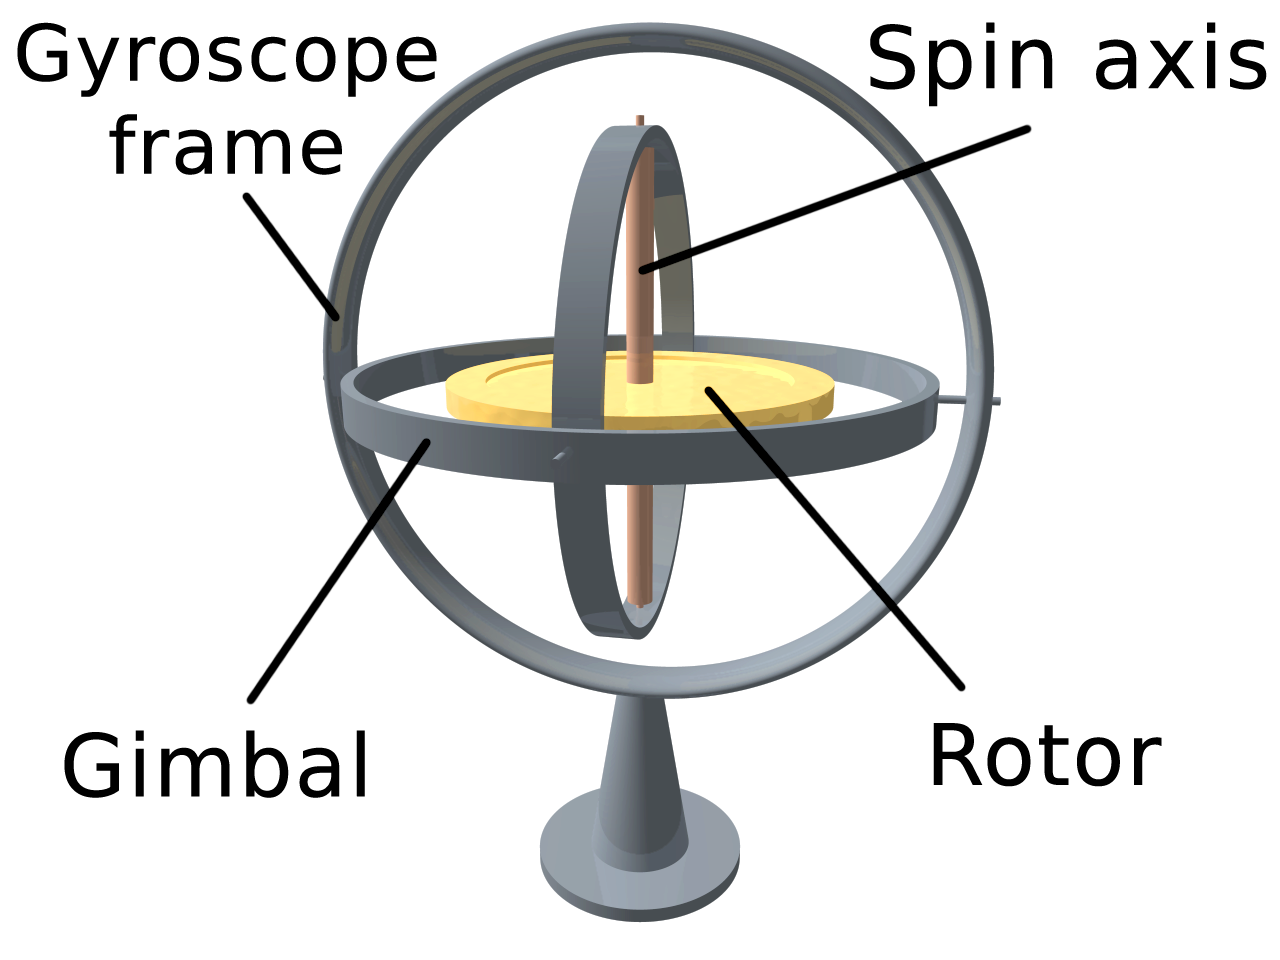 Gyroscope, With Sensor And Crazepony, Rotates to a new large world 